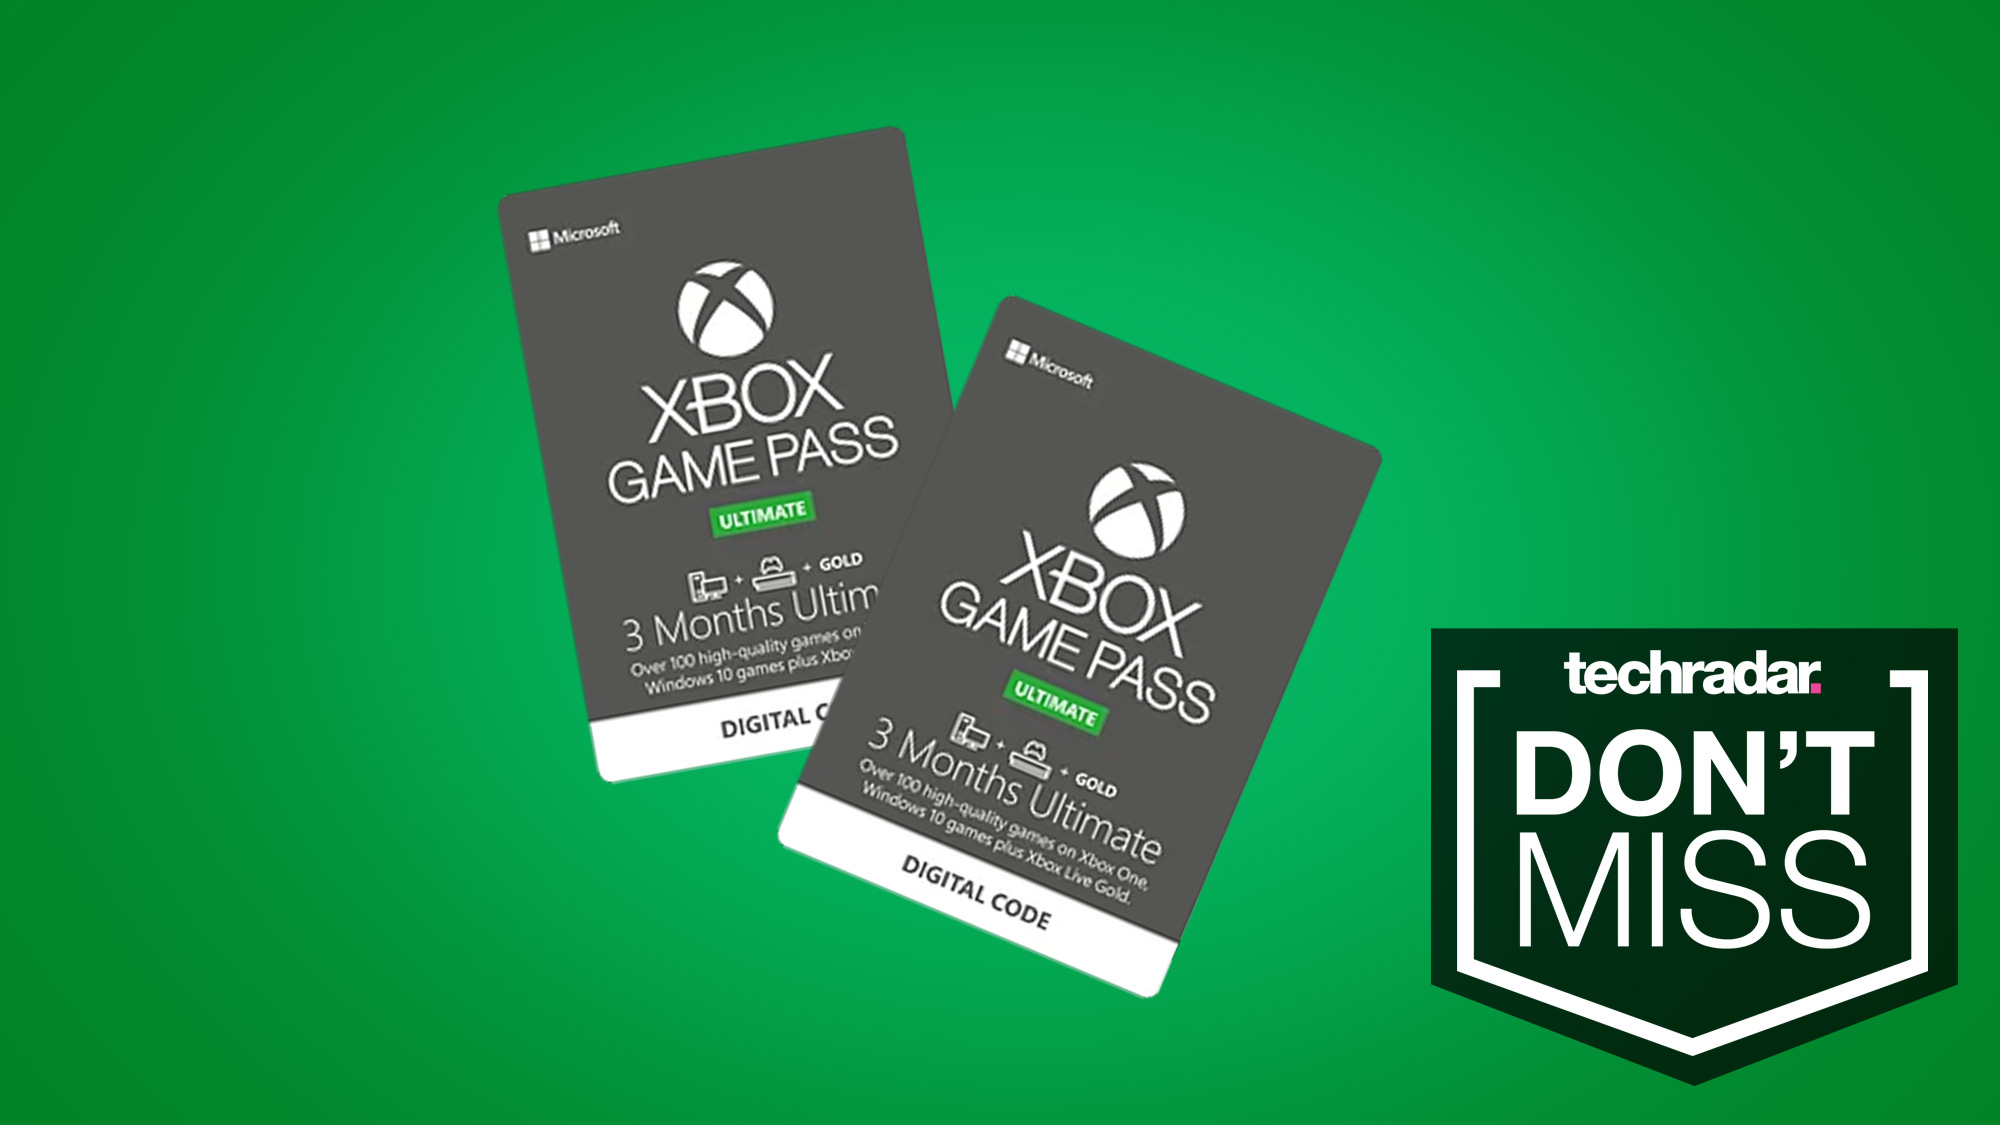 xbox live ultimate code